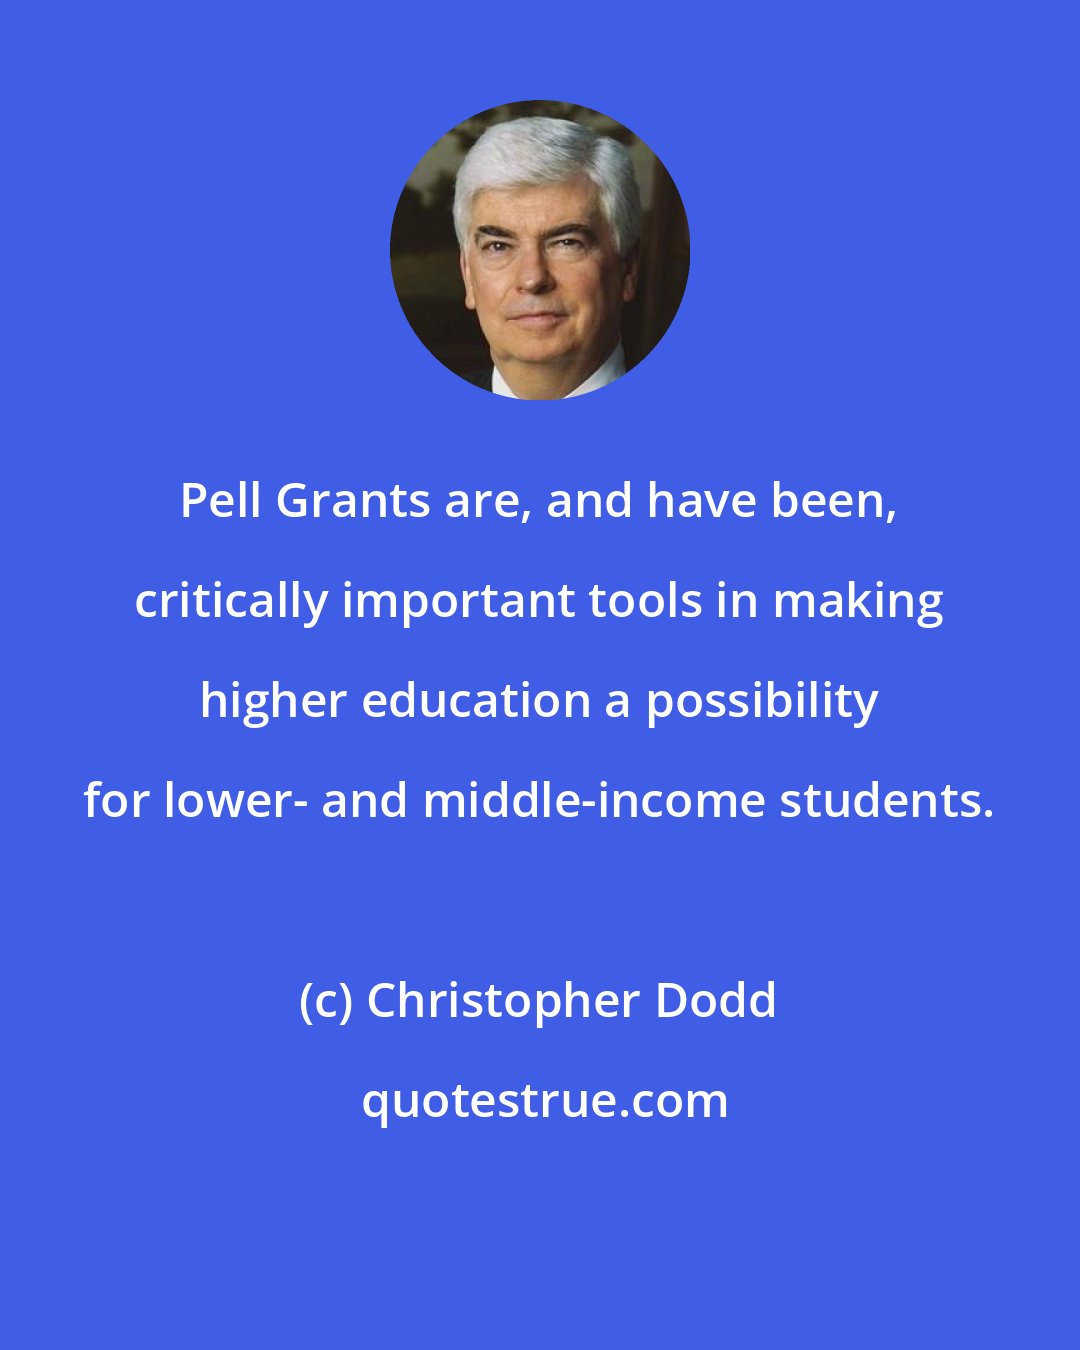 Christopher Dodd: Pell Grants are, and have been, critically important tools in making higher education a possibility for lower- and middle-income students.